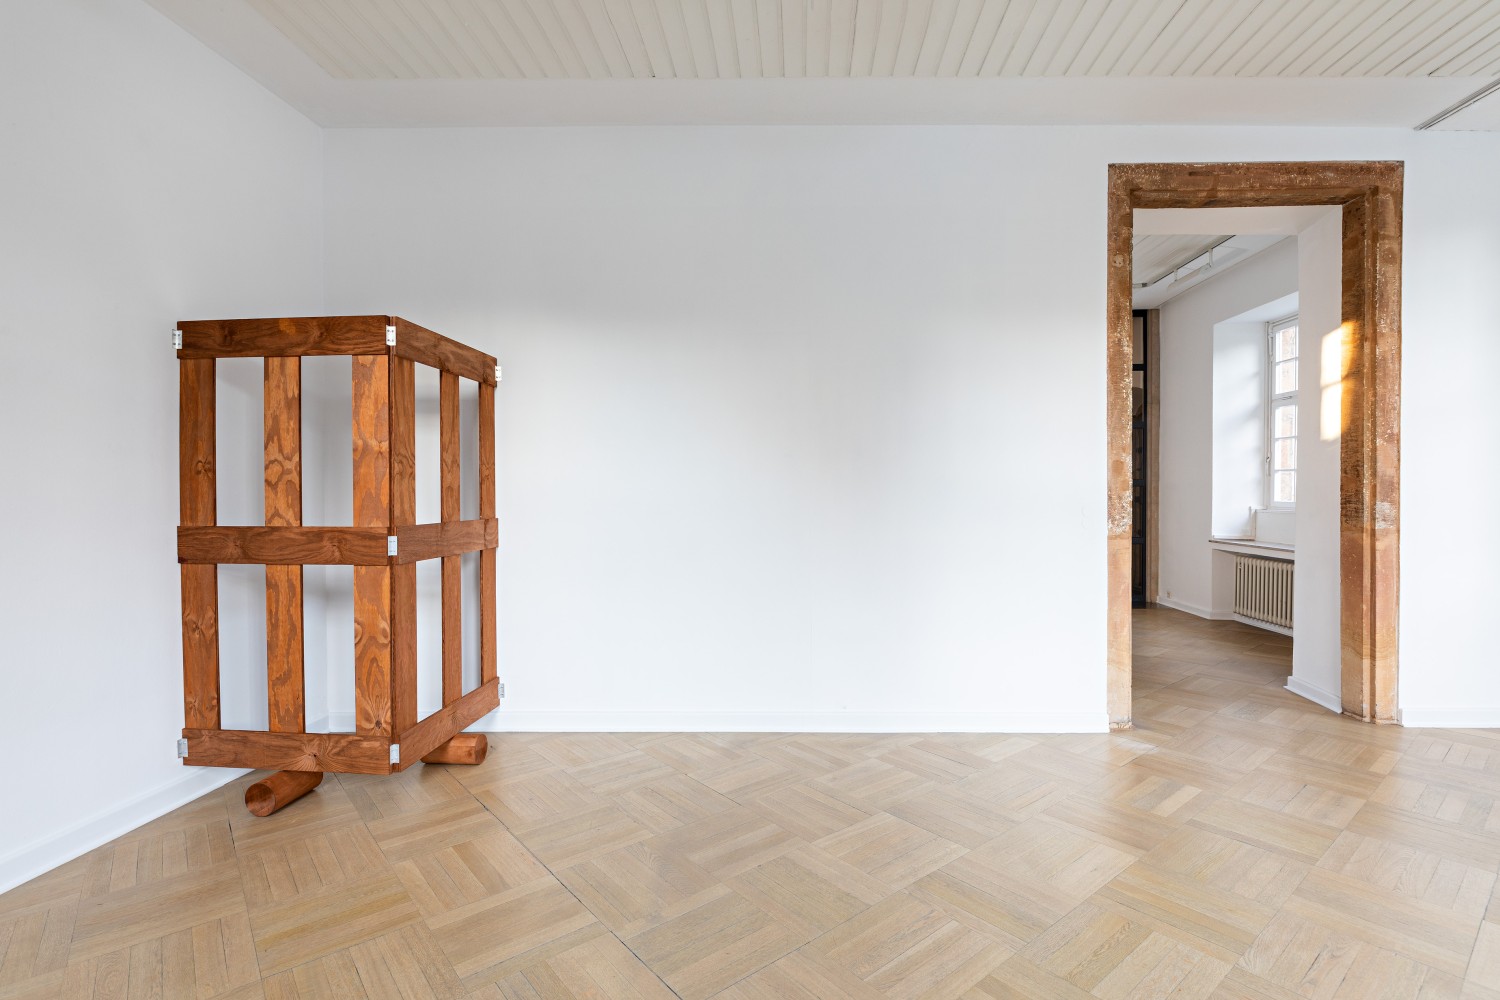 Back to the first object: the grid-like arrangement of the wooden gates now becomes clear. Even if one cannot see the object in the other room through the wall, it is now possible to imagine how the gate continues across walls and thus creates its own spaces.